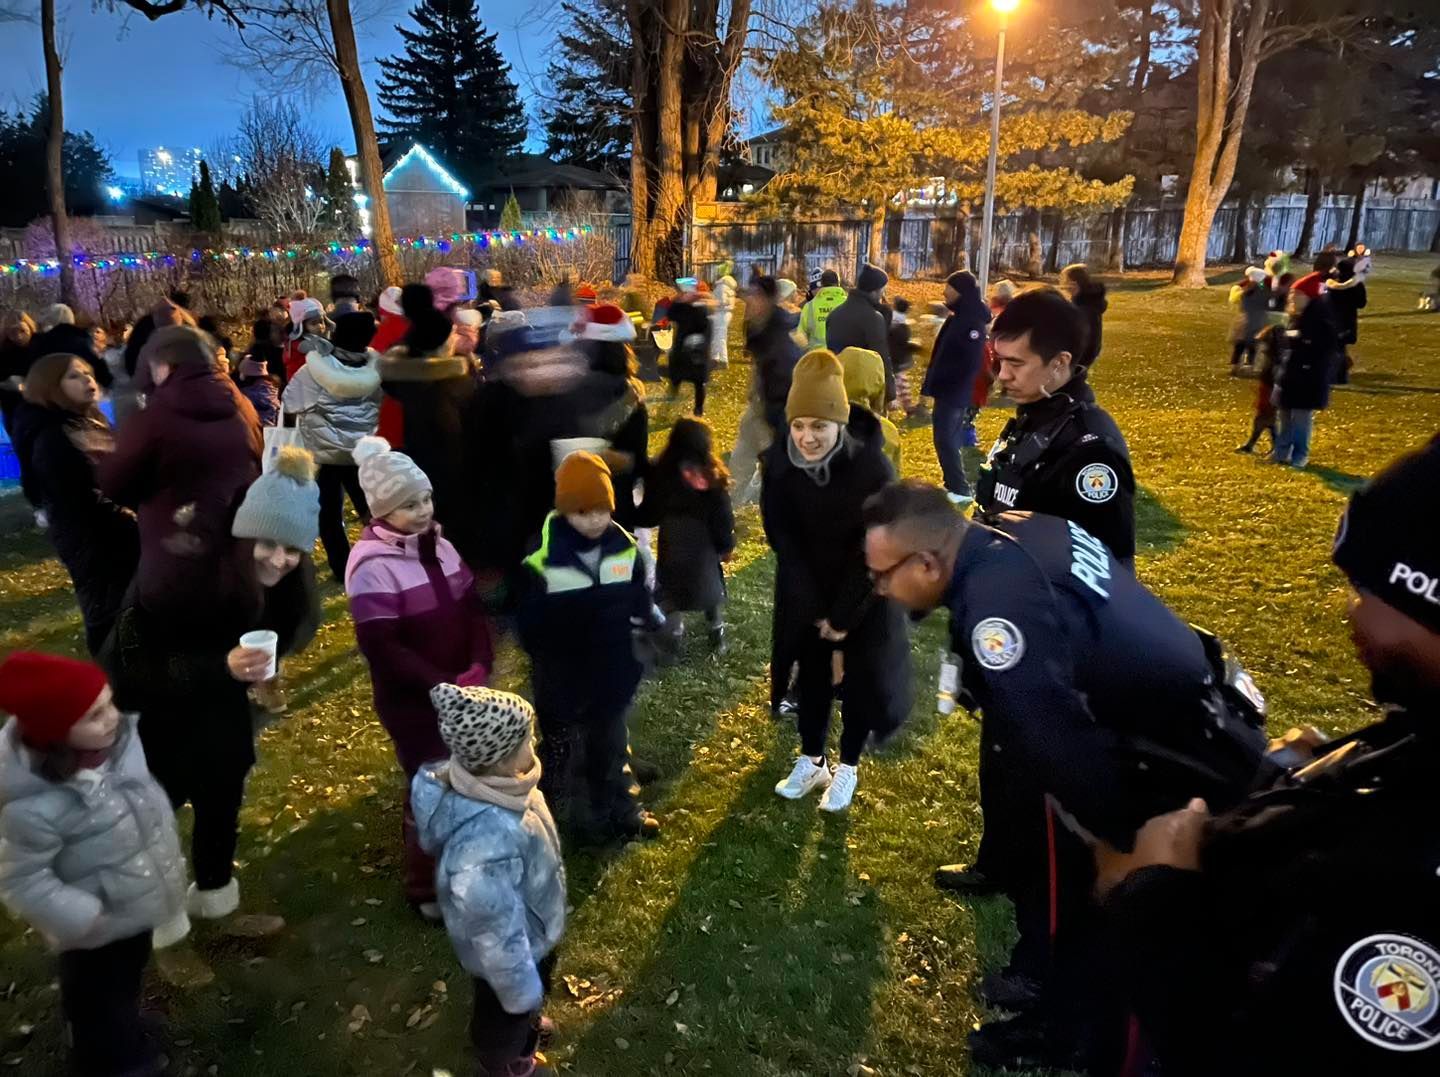 a group of people are gathered in a park with police officers